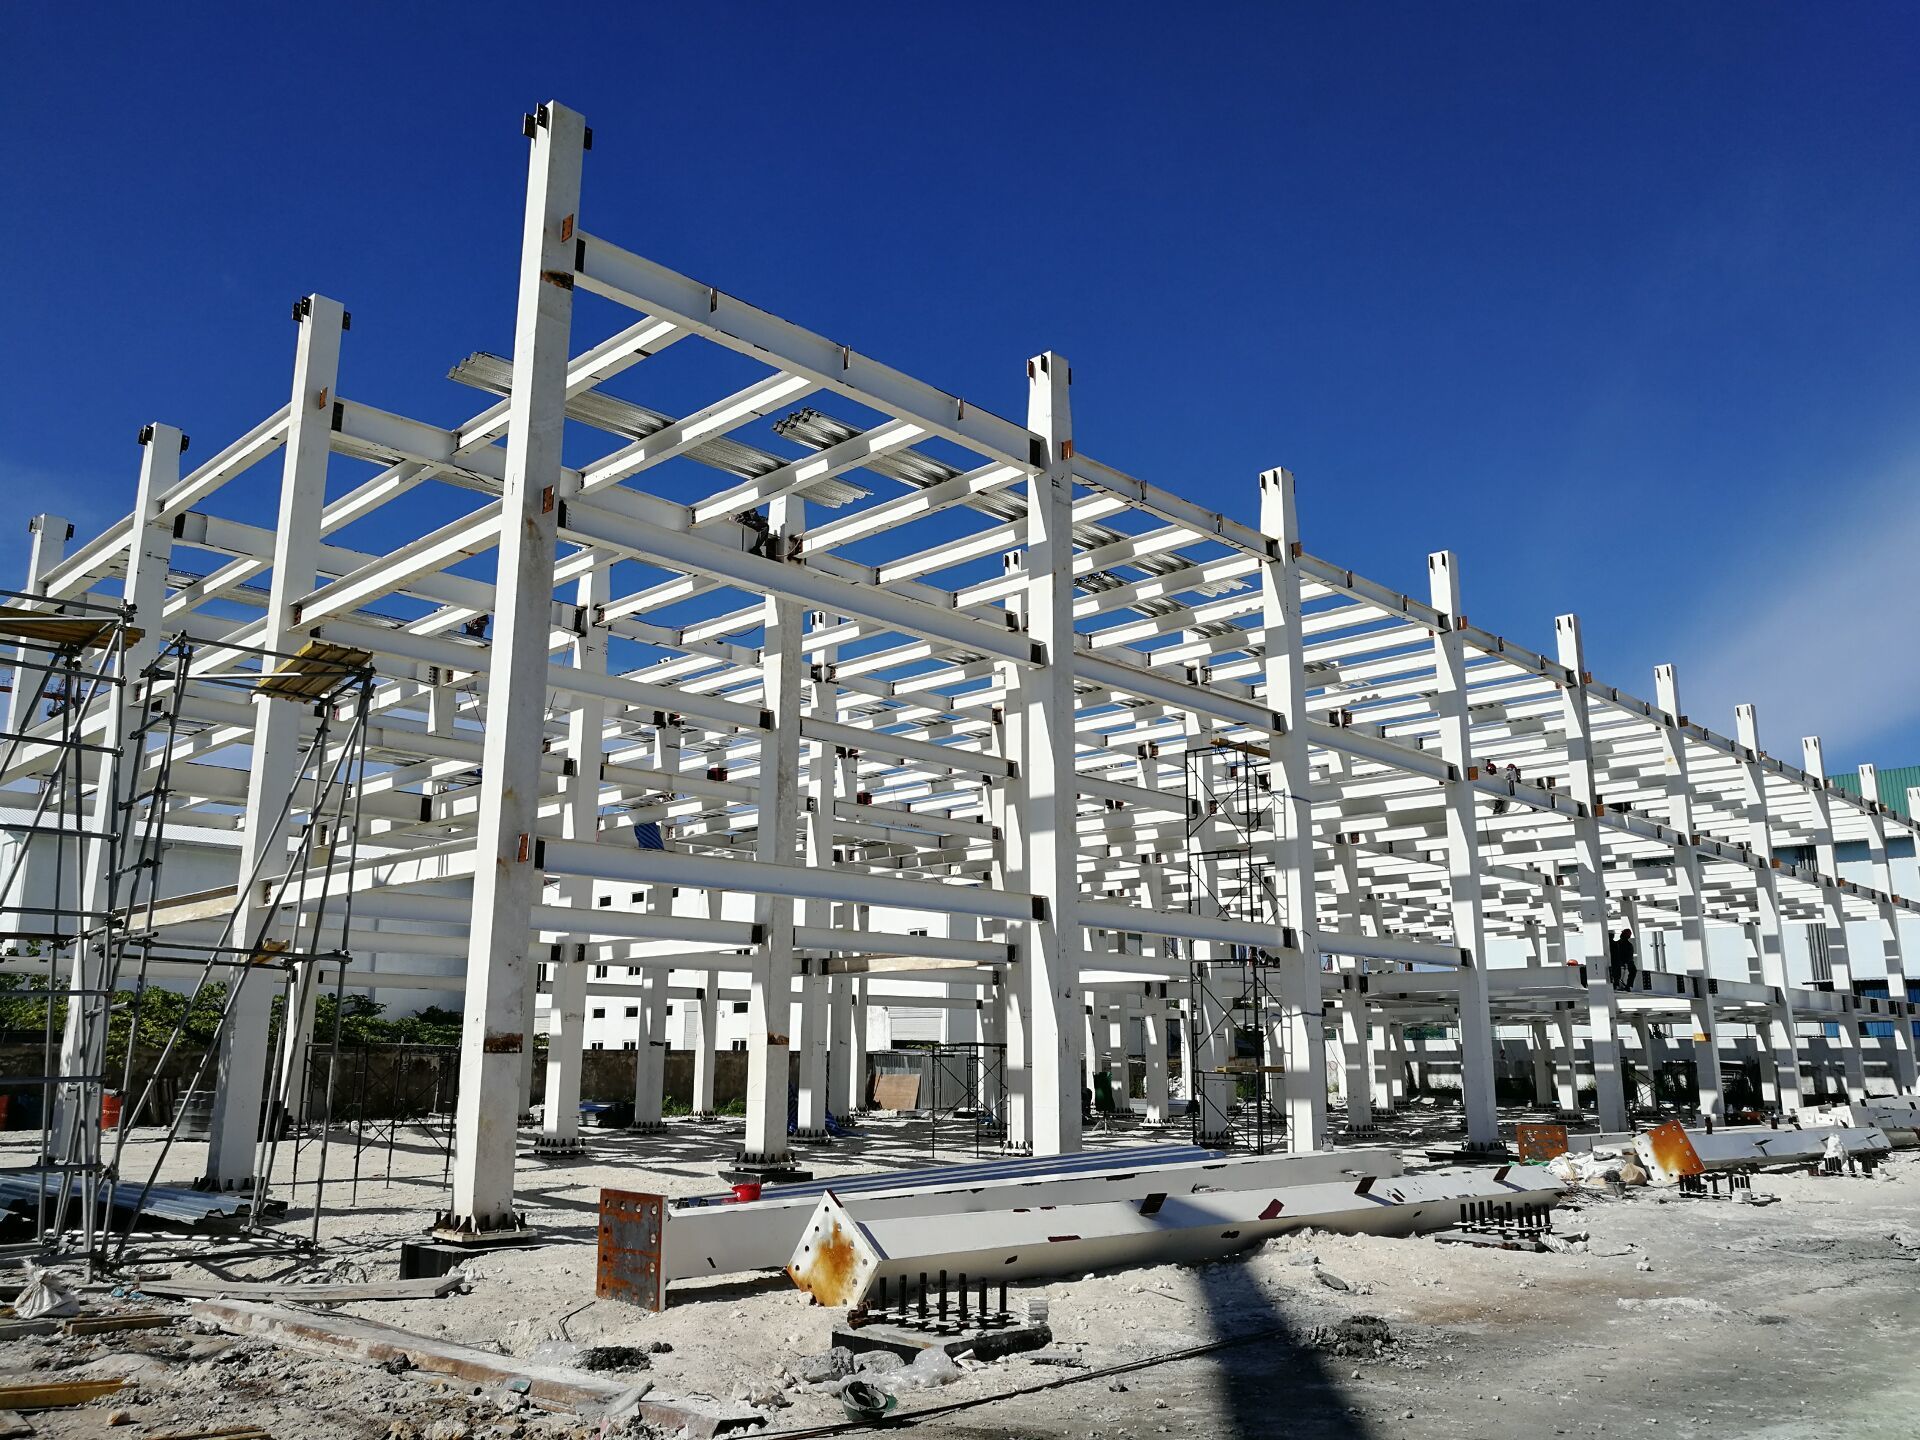 Lida Group prepares to install 1000 unit steel structure apartment complex in record time through industrialized building systems pioneering off-site fabrication.